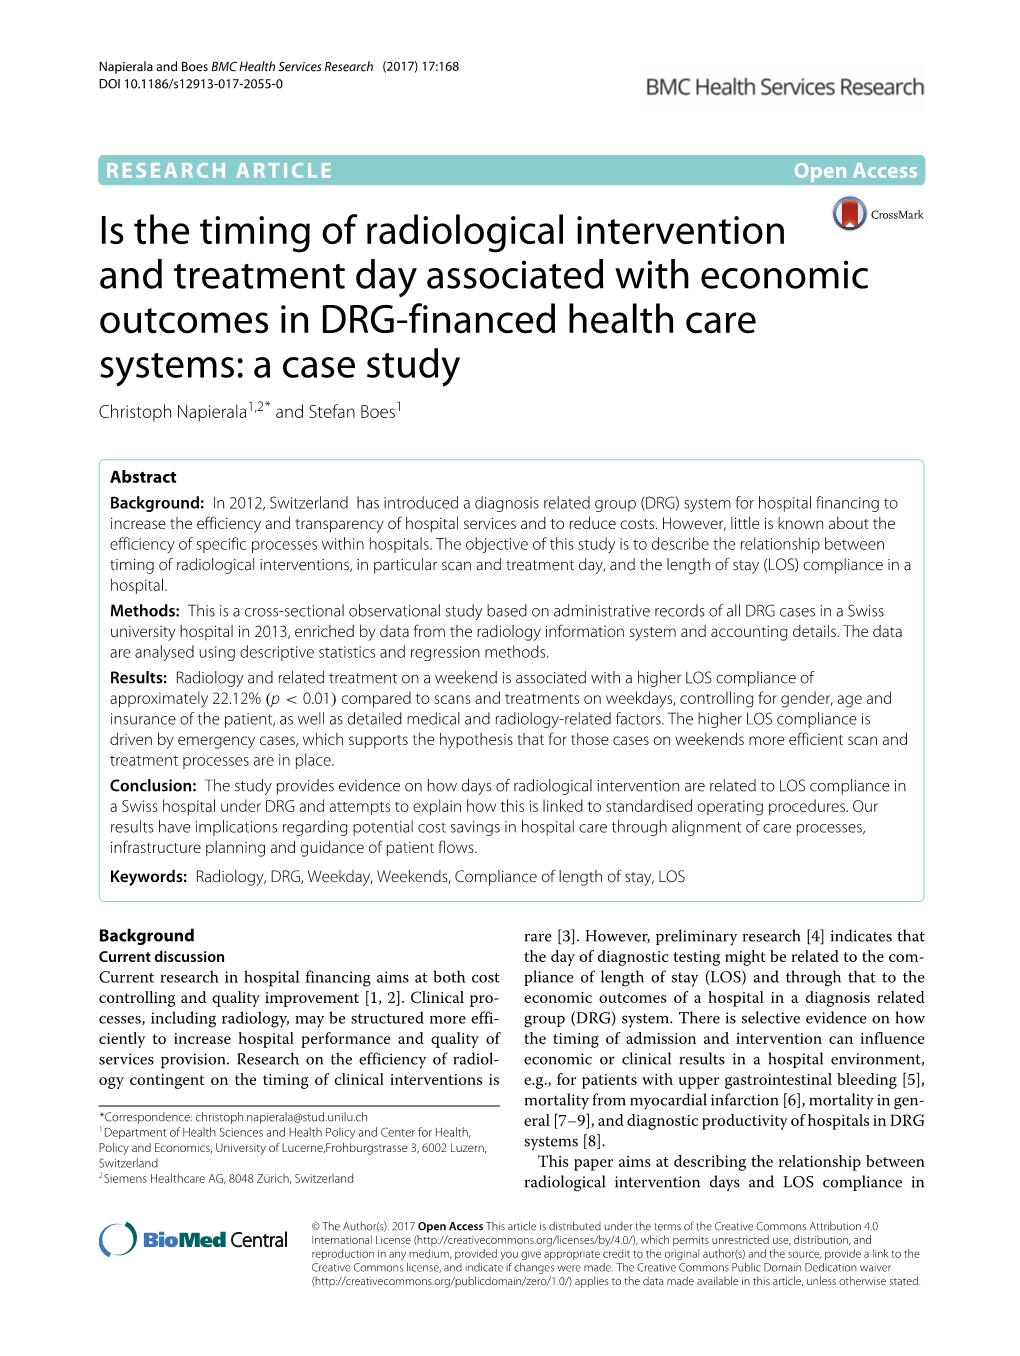 Is the Timing of Radiological Intervention and Treatment Day Associated with Economic Outcomes in DRG-Financed Health Care Syste